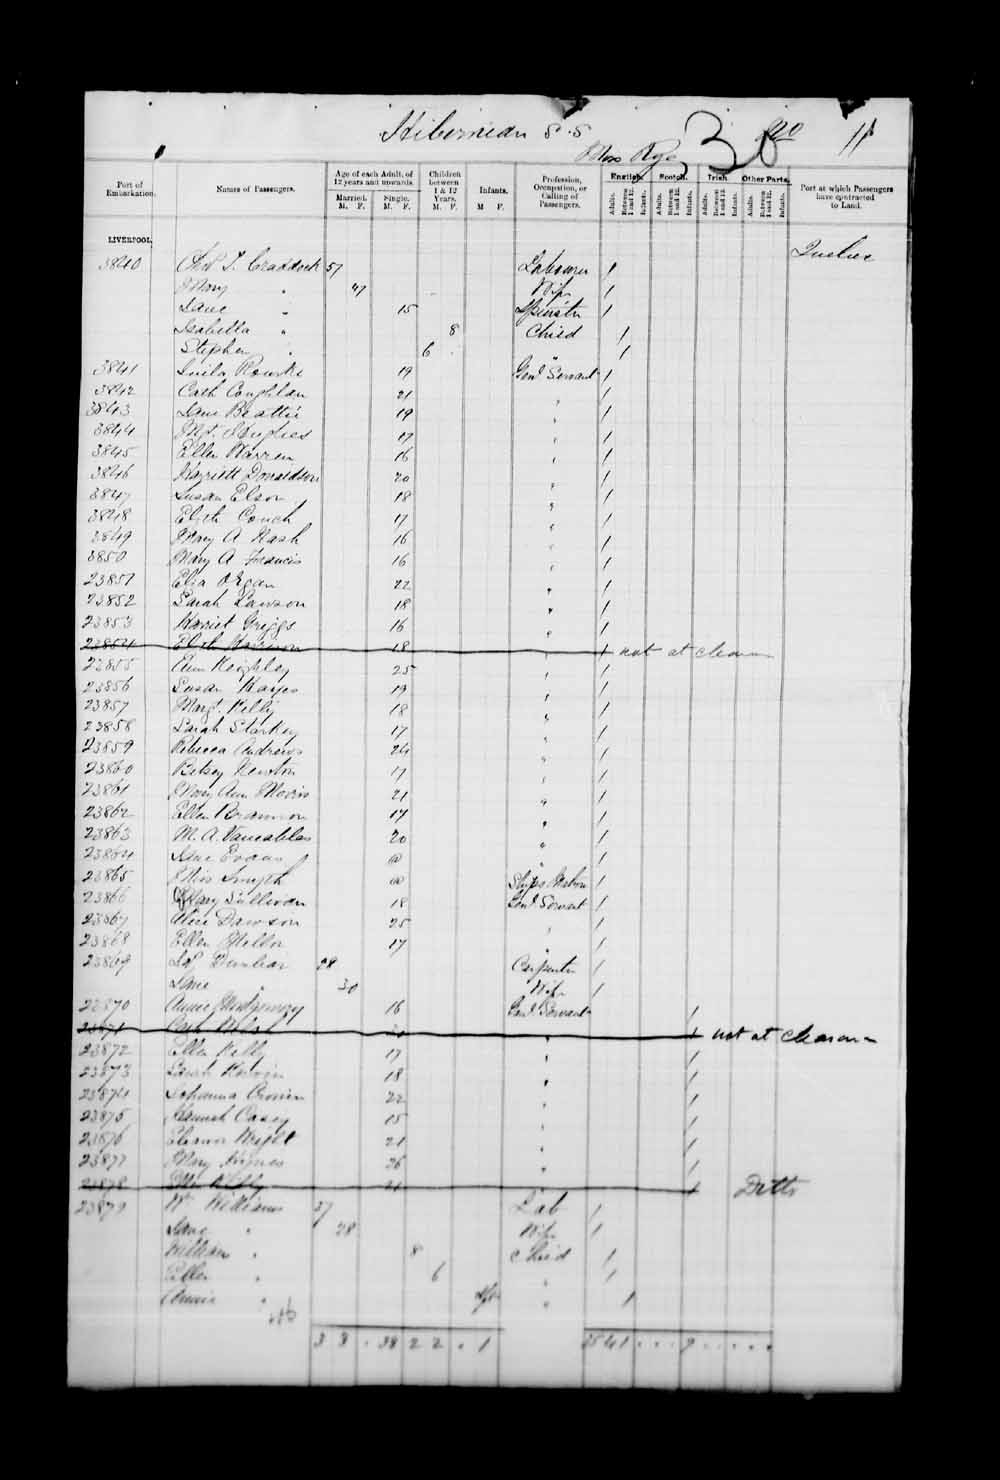 Digitized page of Passenger Lists for Image No.: e003530472